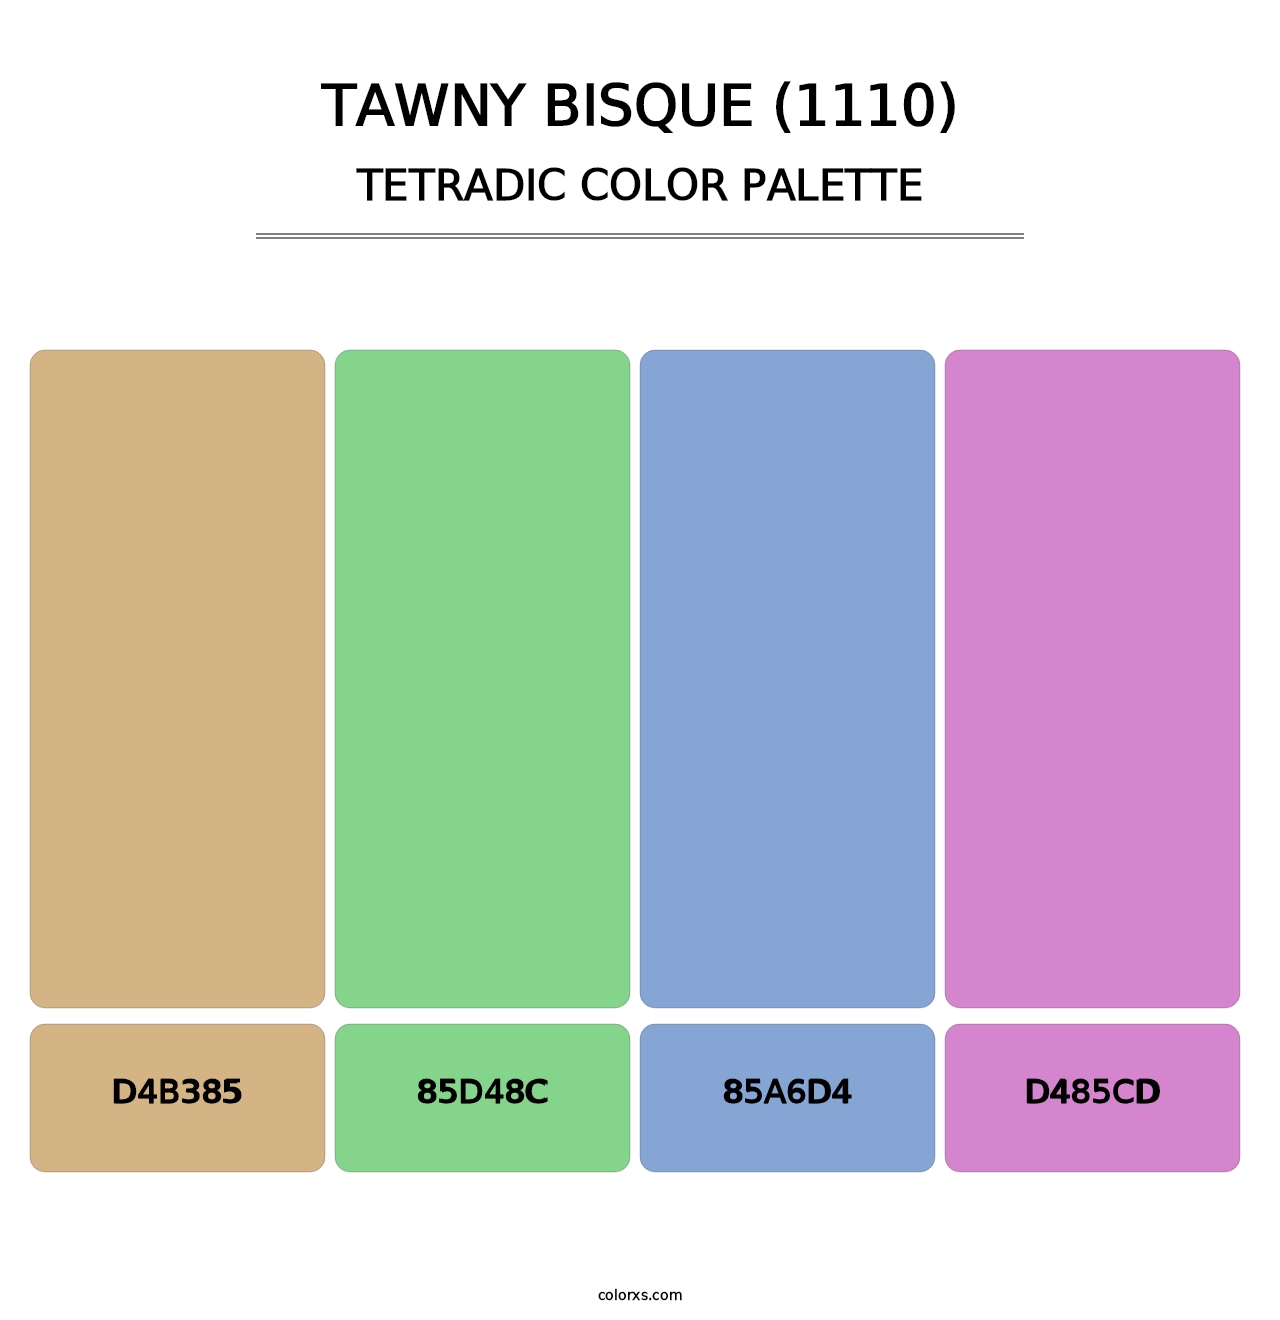 Tawny Bisque (1110) - Tetradic Color Palette